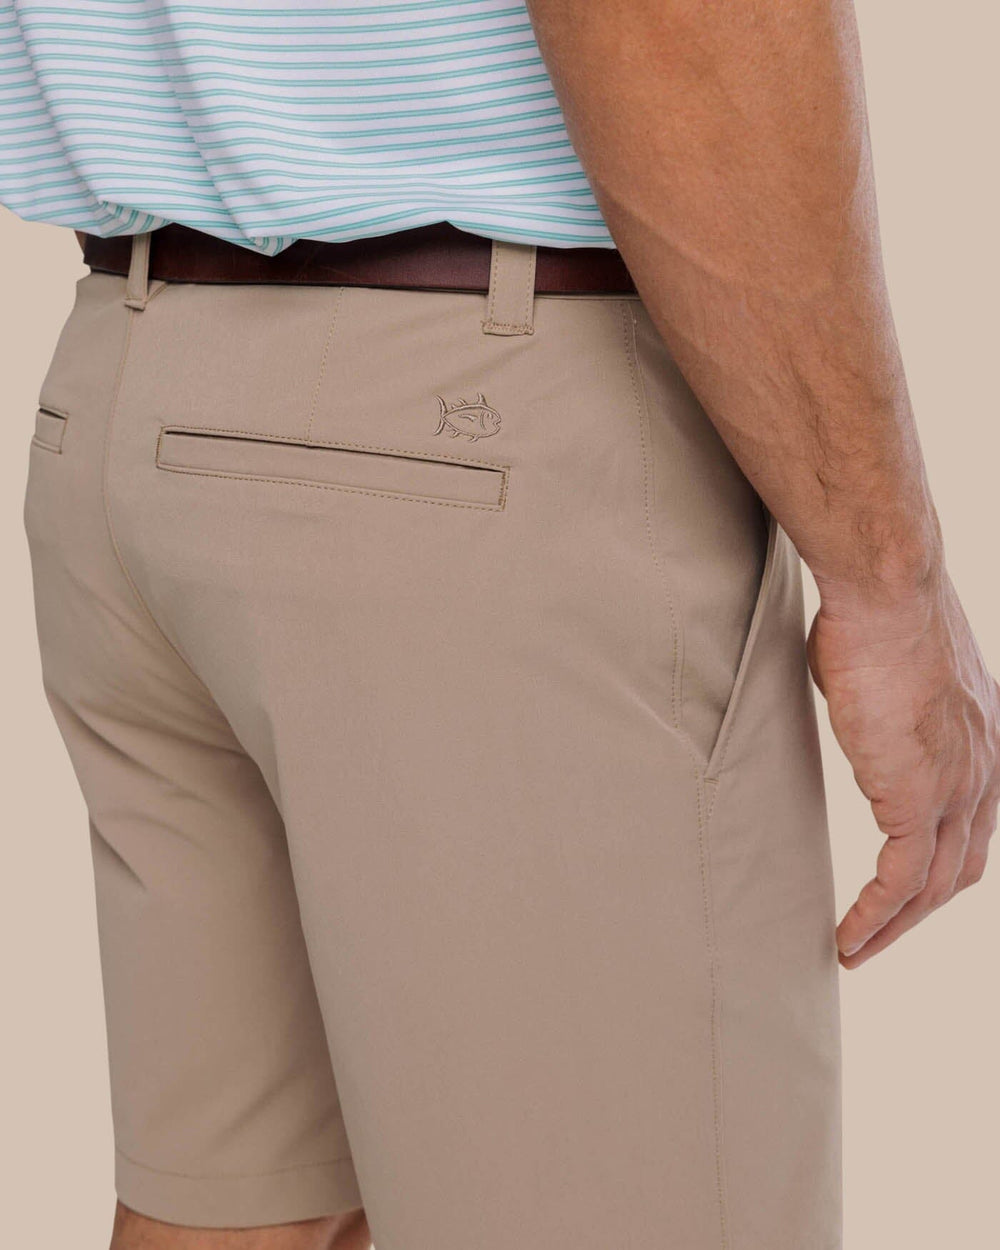 The detail view of the Southern Tide brrr die performance short 1 by Southern Tide - Sandstone Khaki